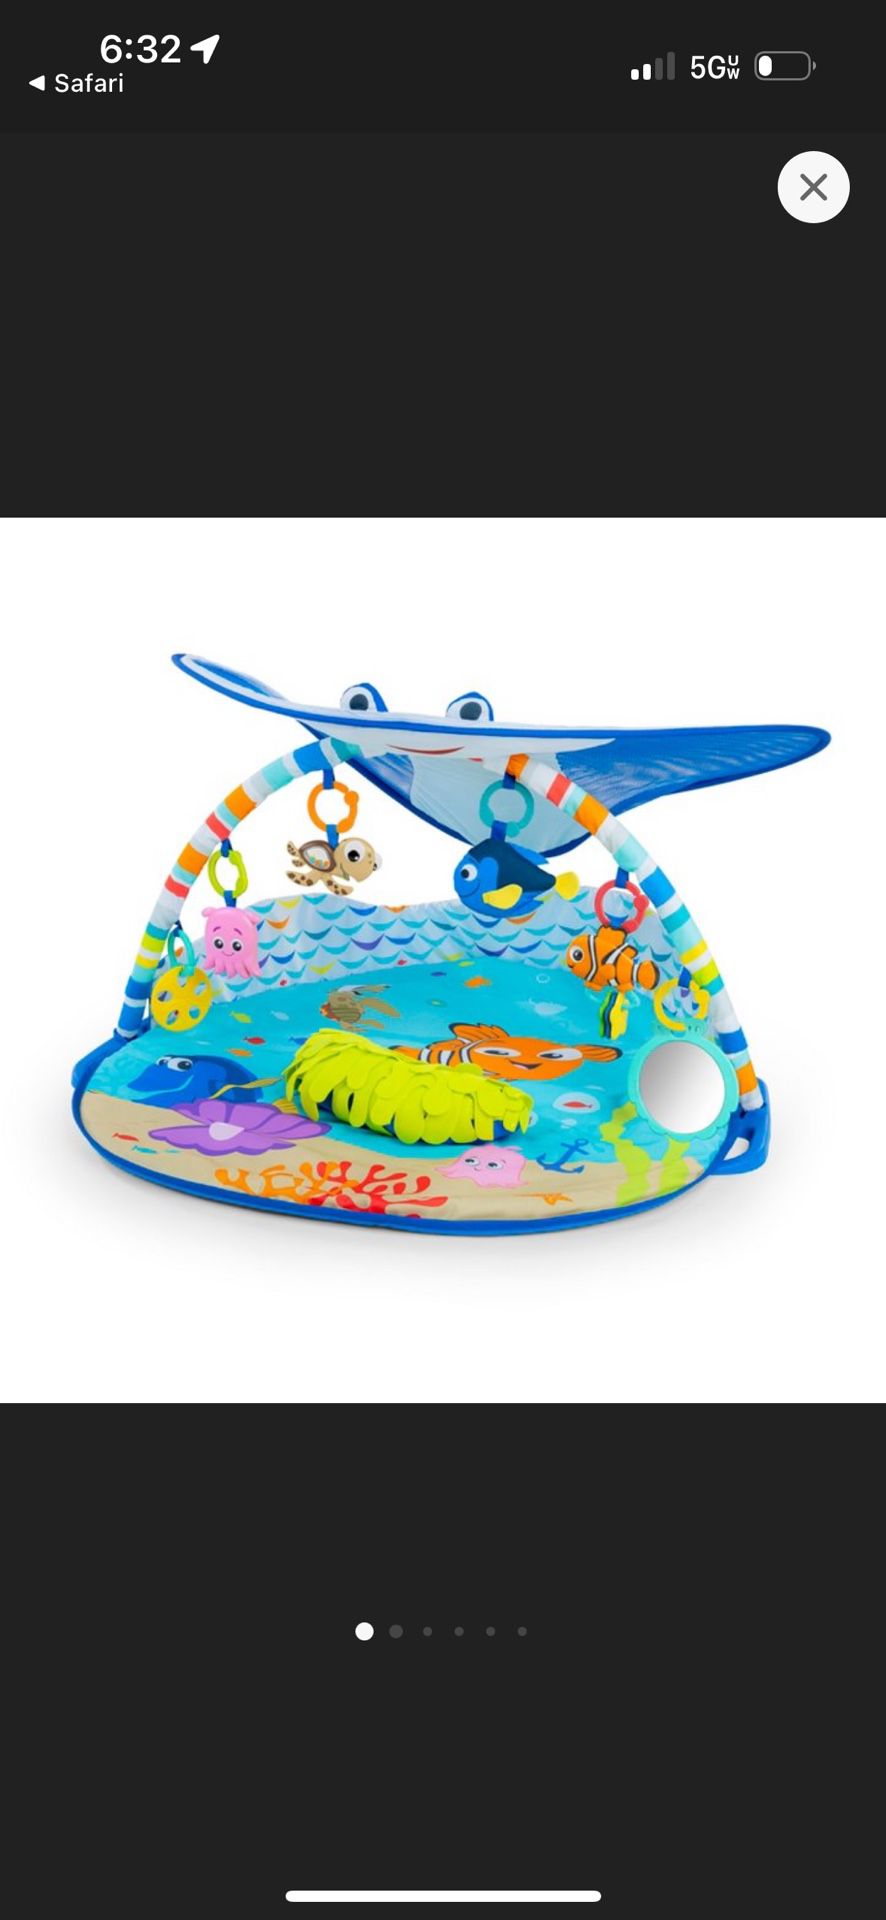 Disney Baby Finding Nemo Gym & Tummy Time Play Mat by Bright Starts